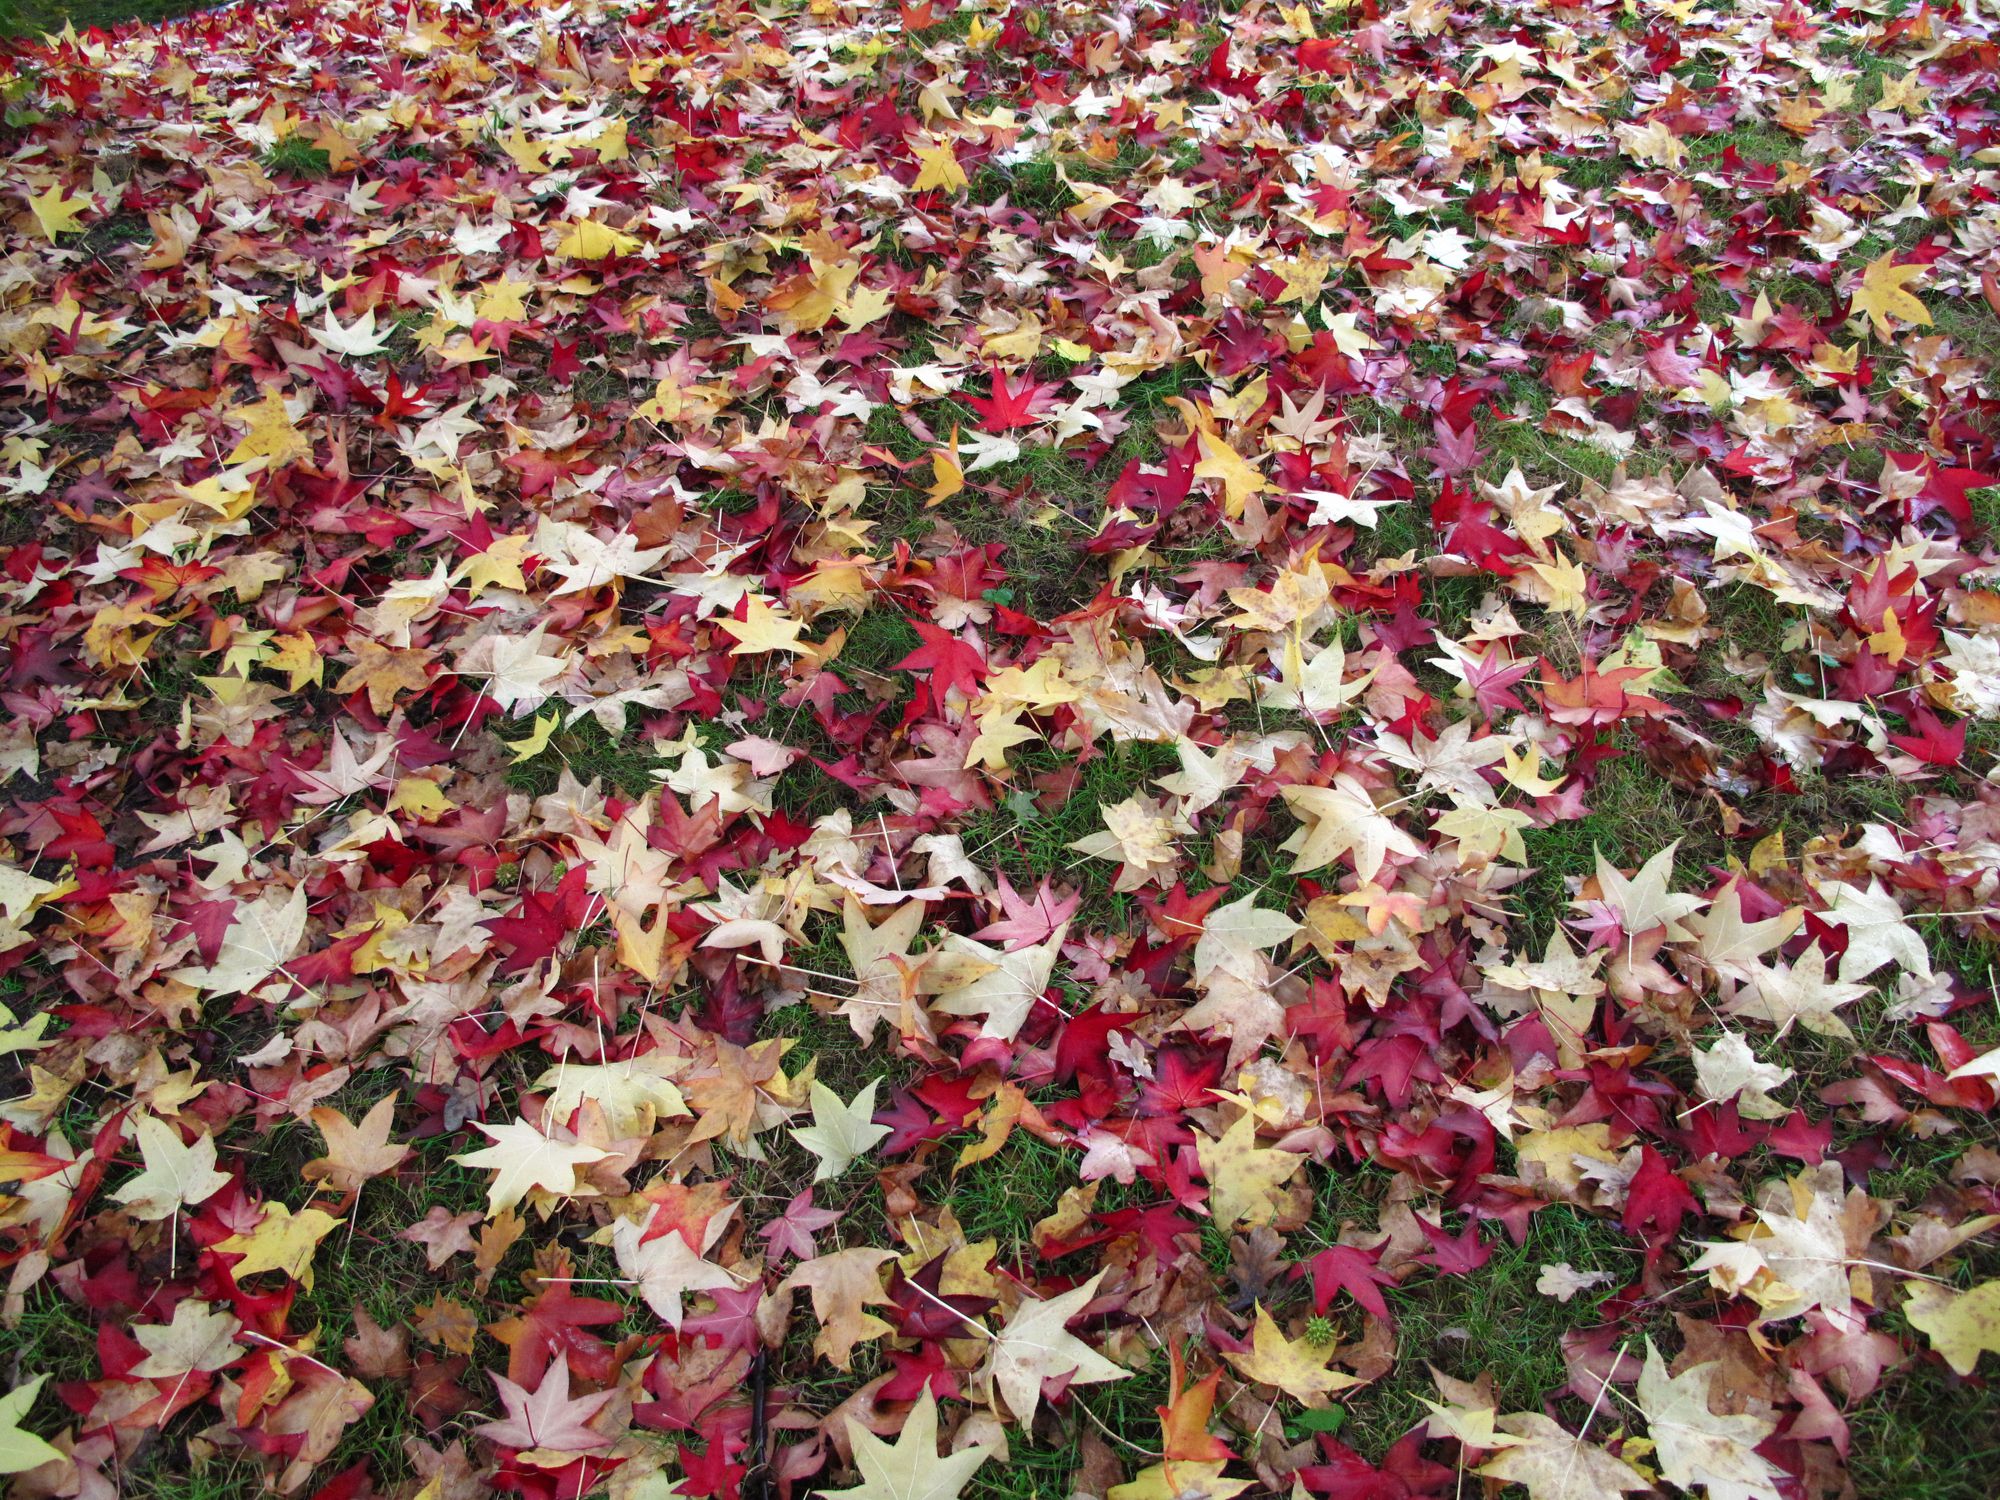 Fall Lawn Care Tips to 'Leaf' No Trace